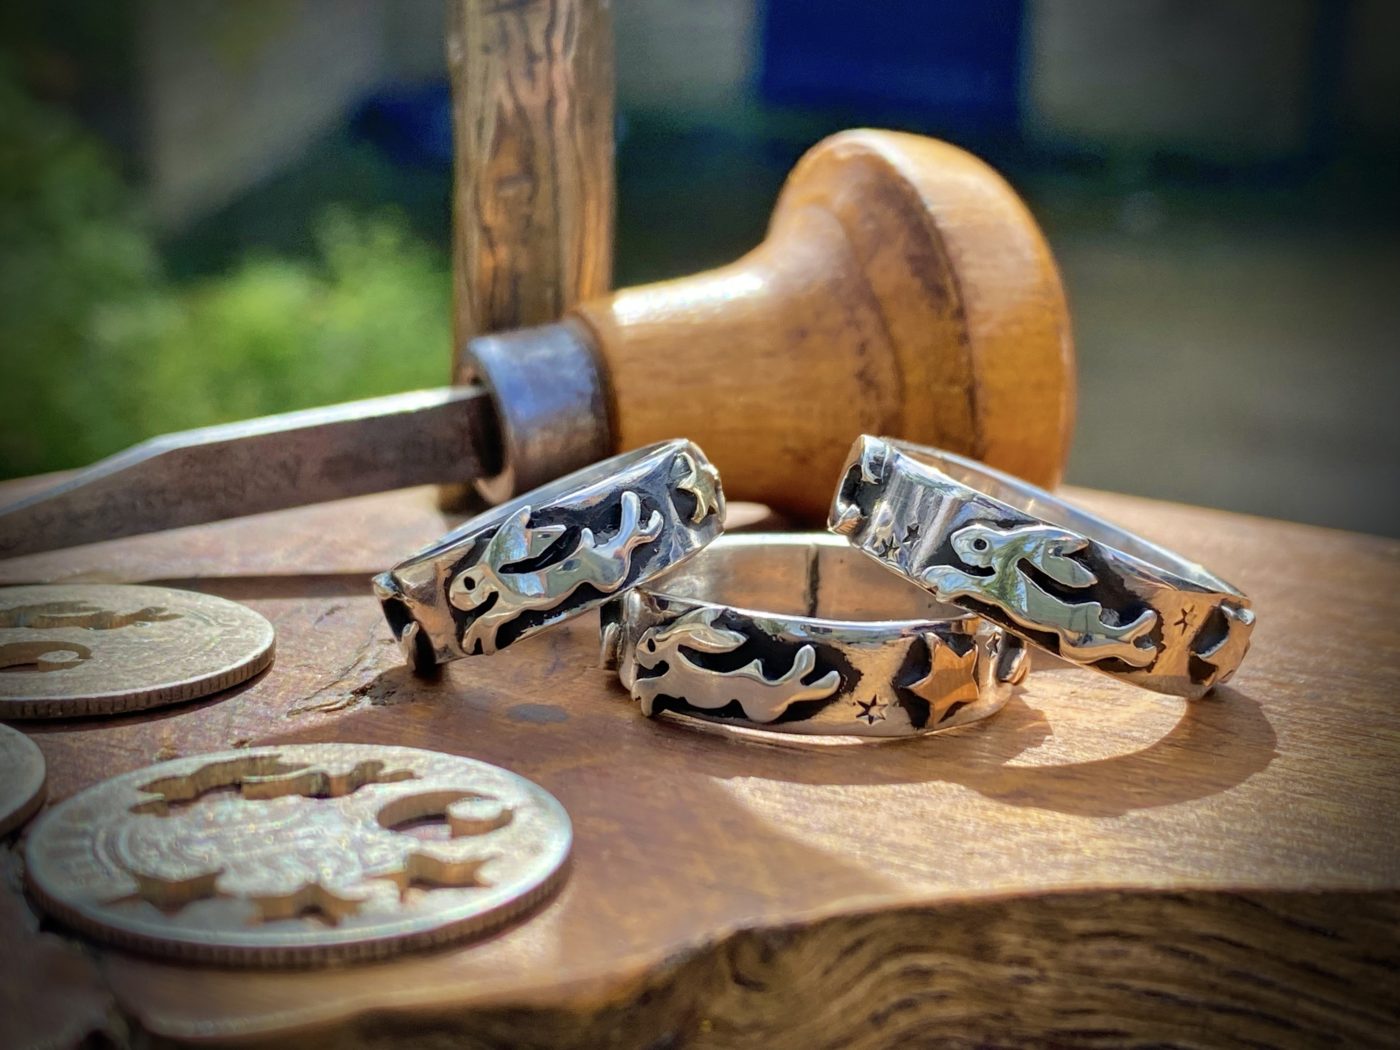 magical leaping hare rings made from ethical silver